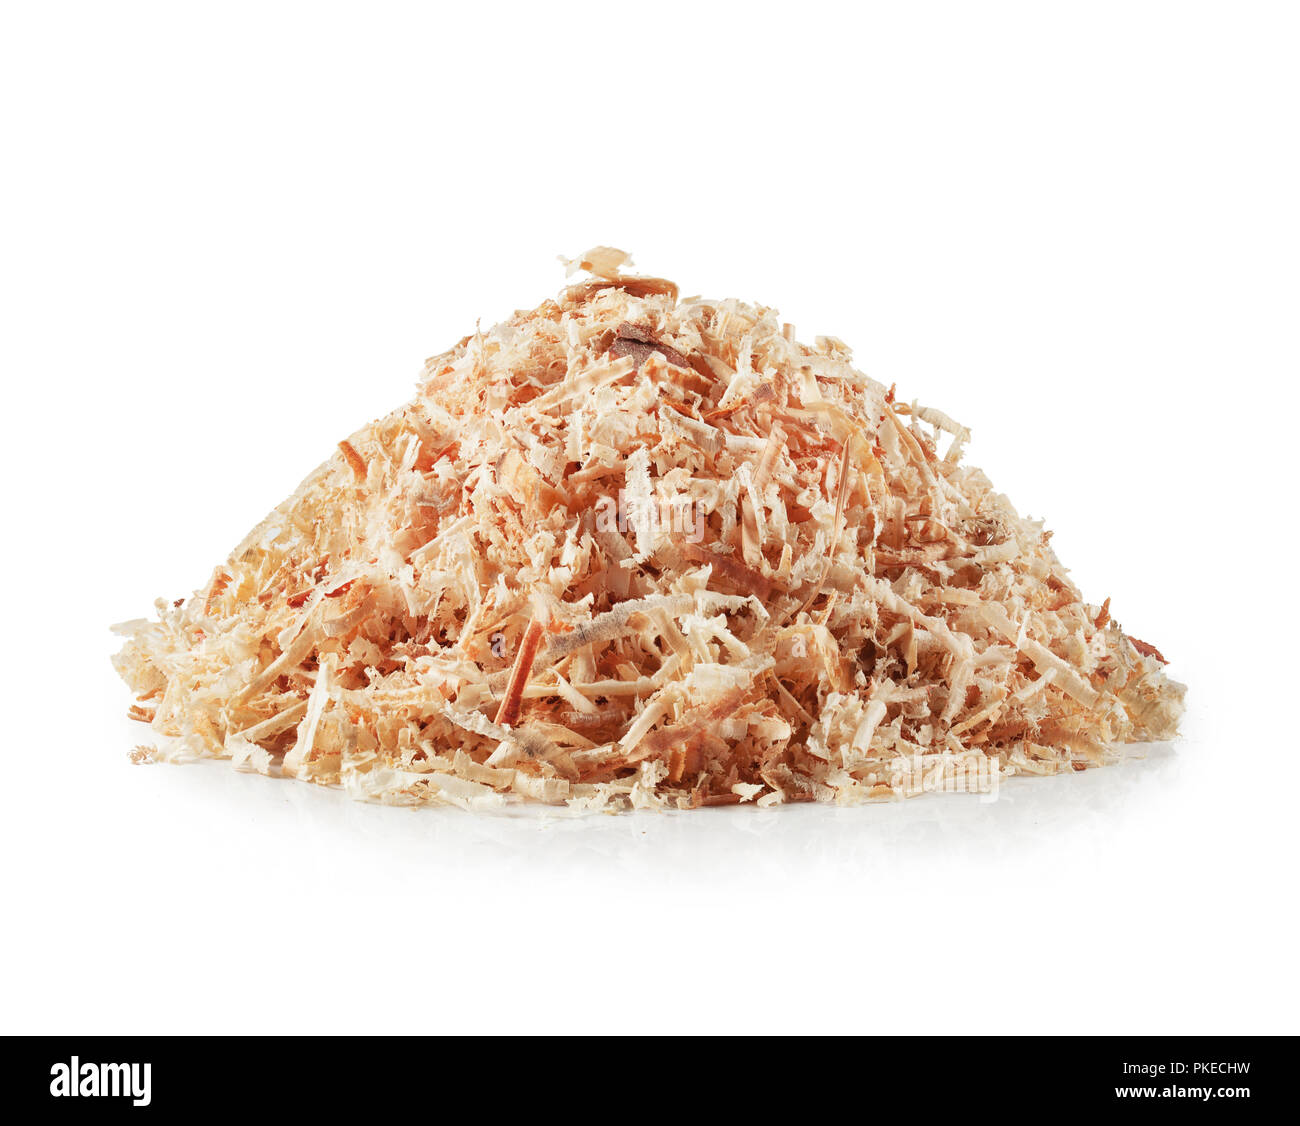 Pile of wooden sawdust and shavings isolated on white Stock Photo